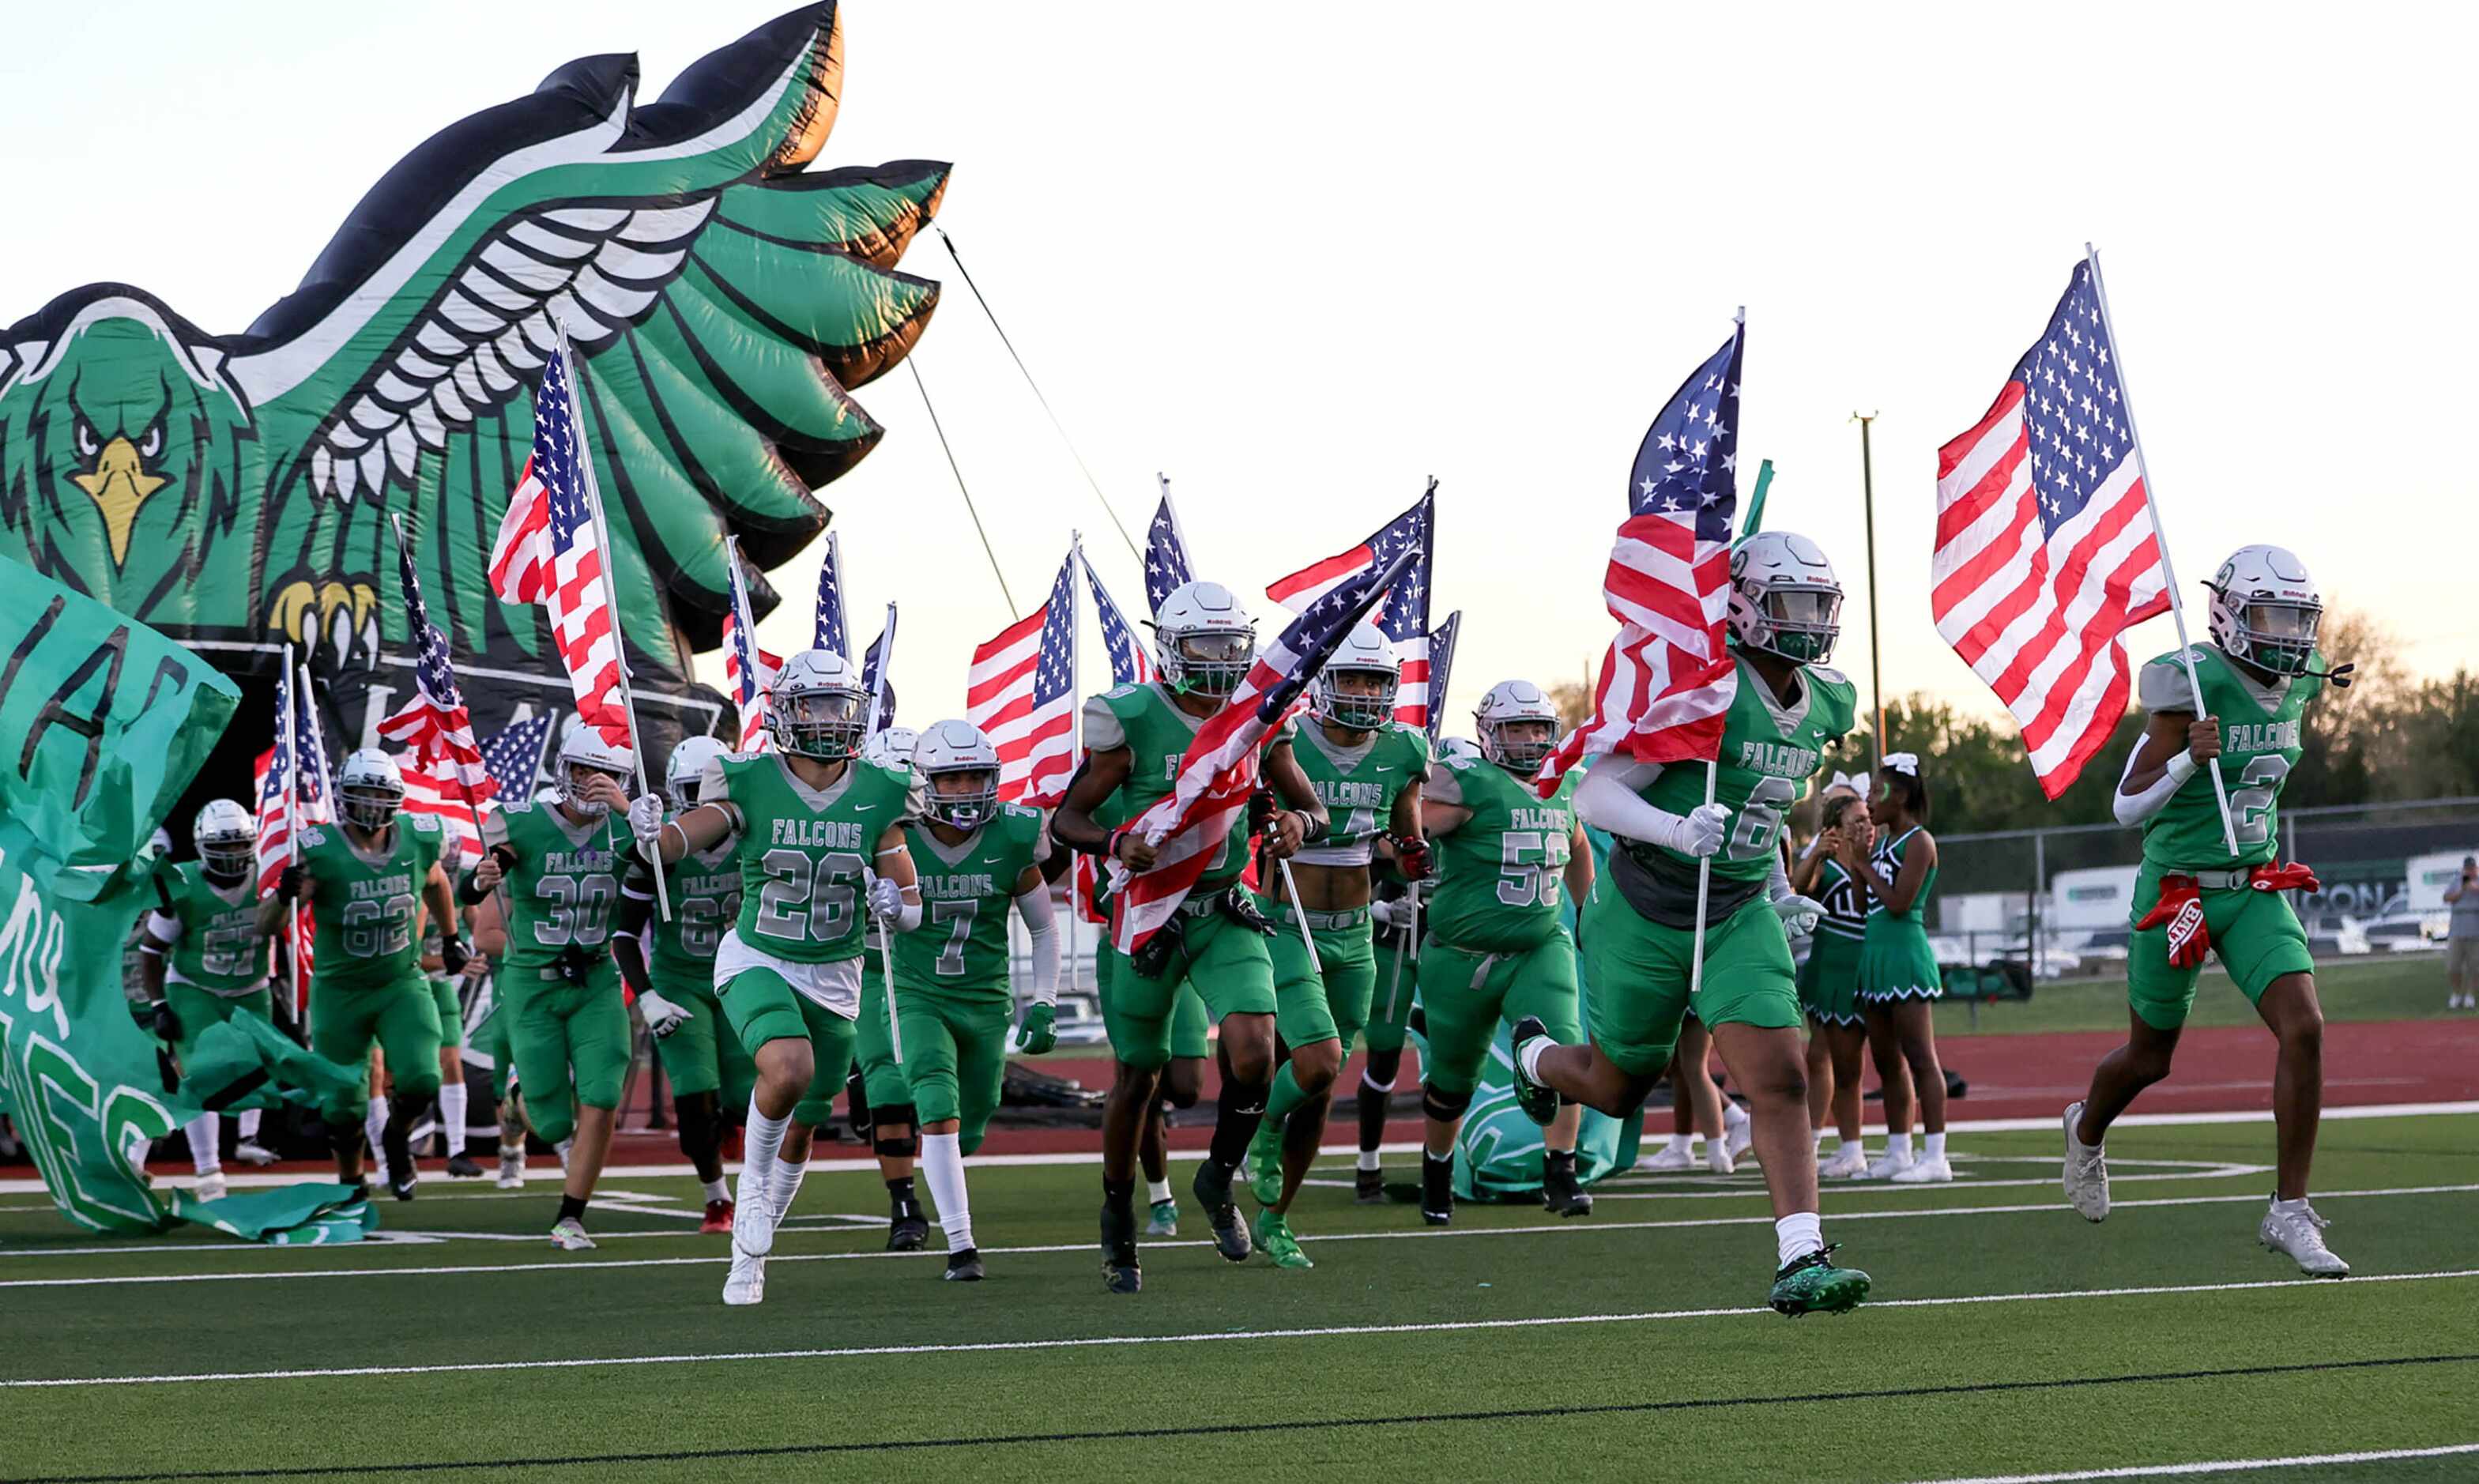 The Lake Dallas Falcons enter the field to face Frisco Memorial in a District 3-5A Division...